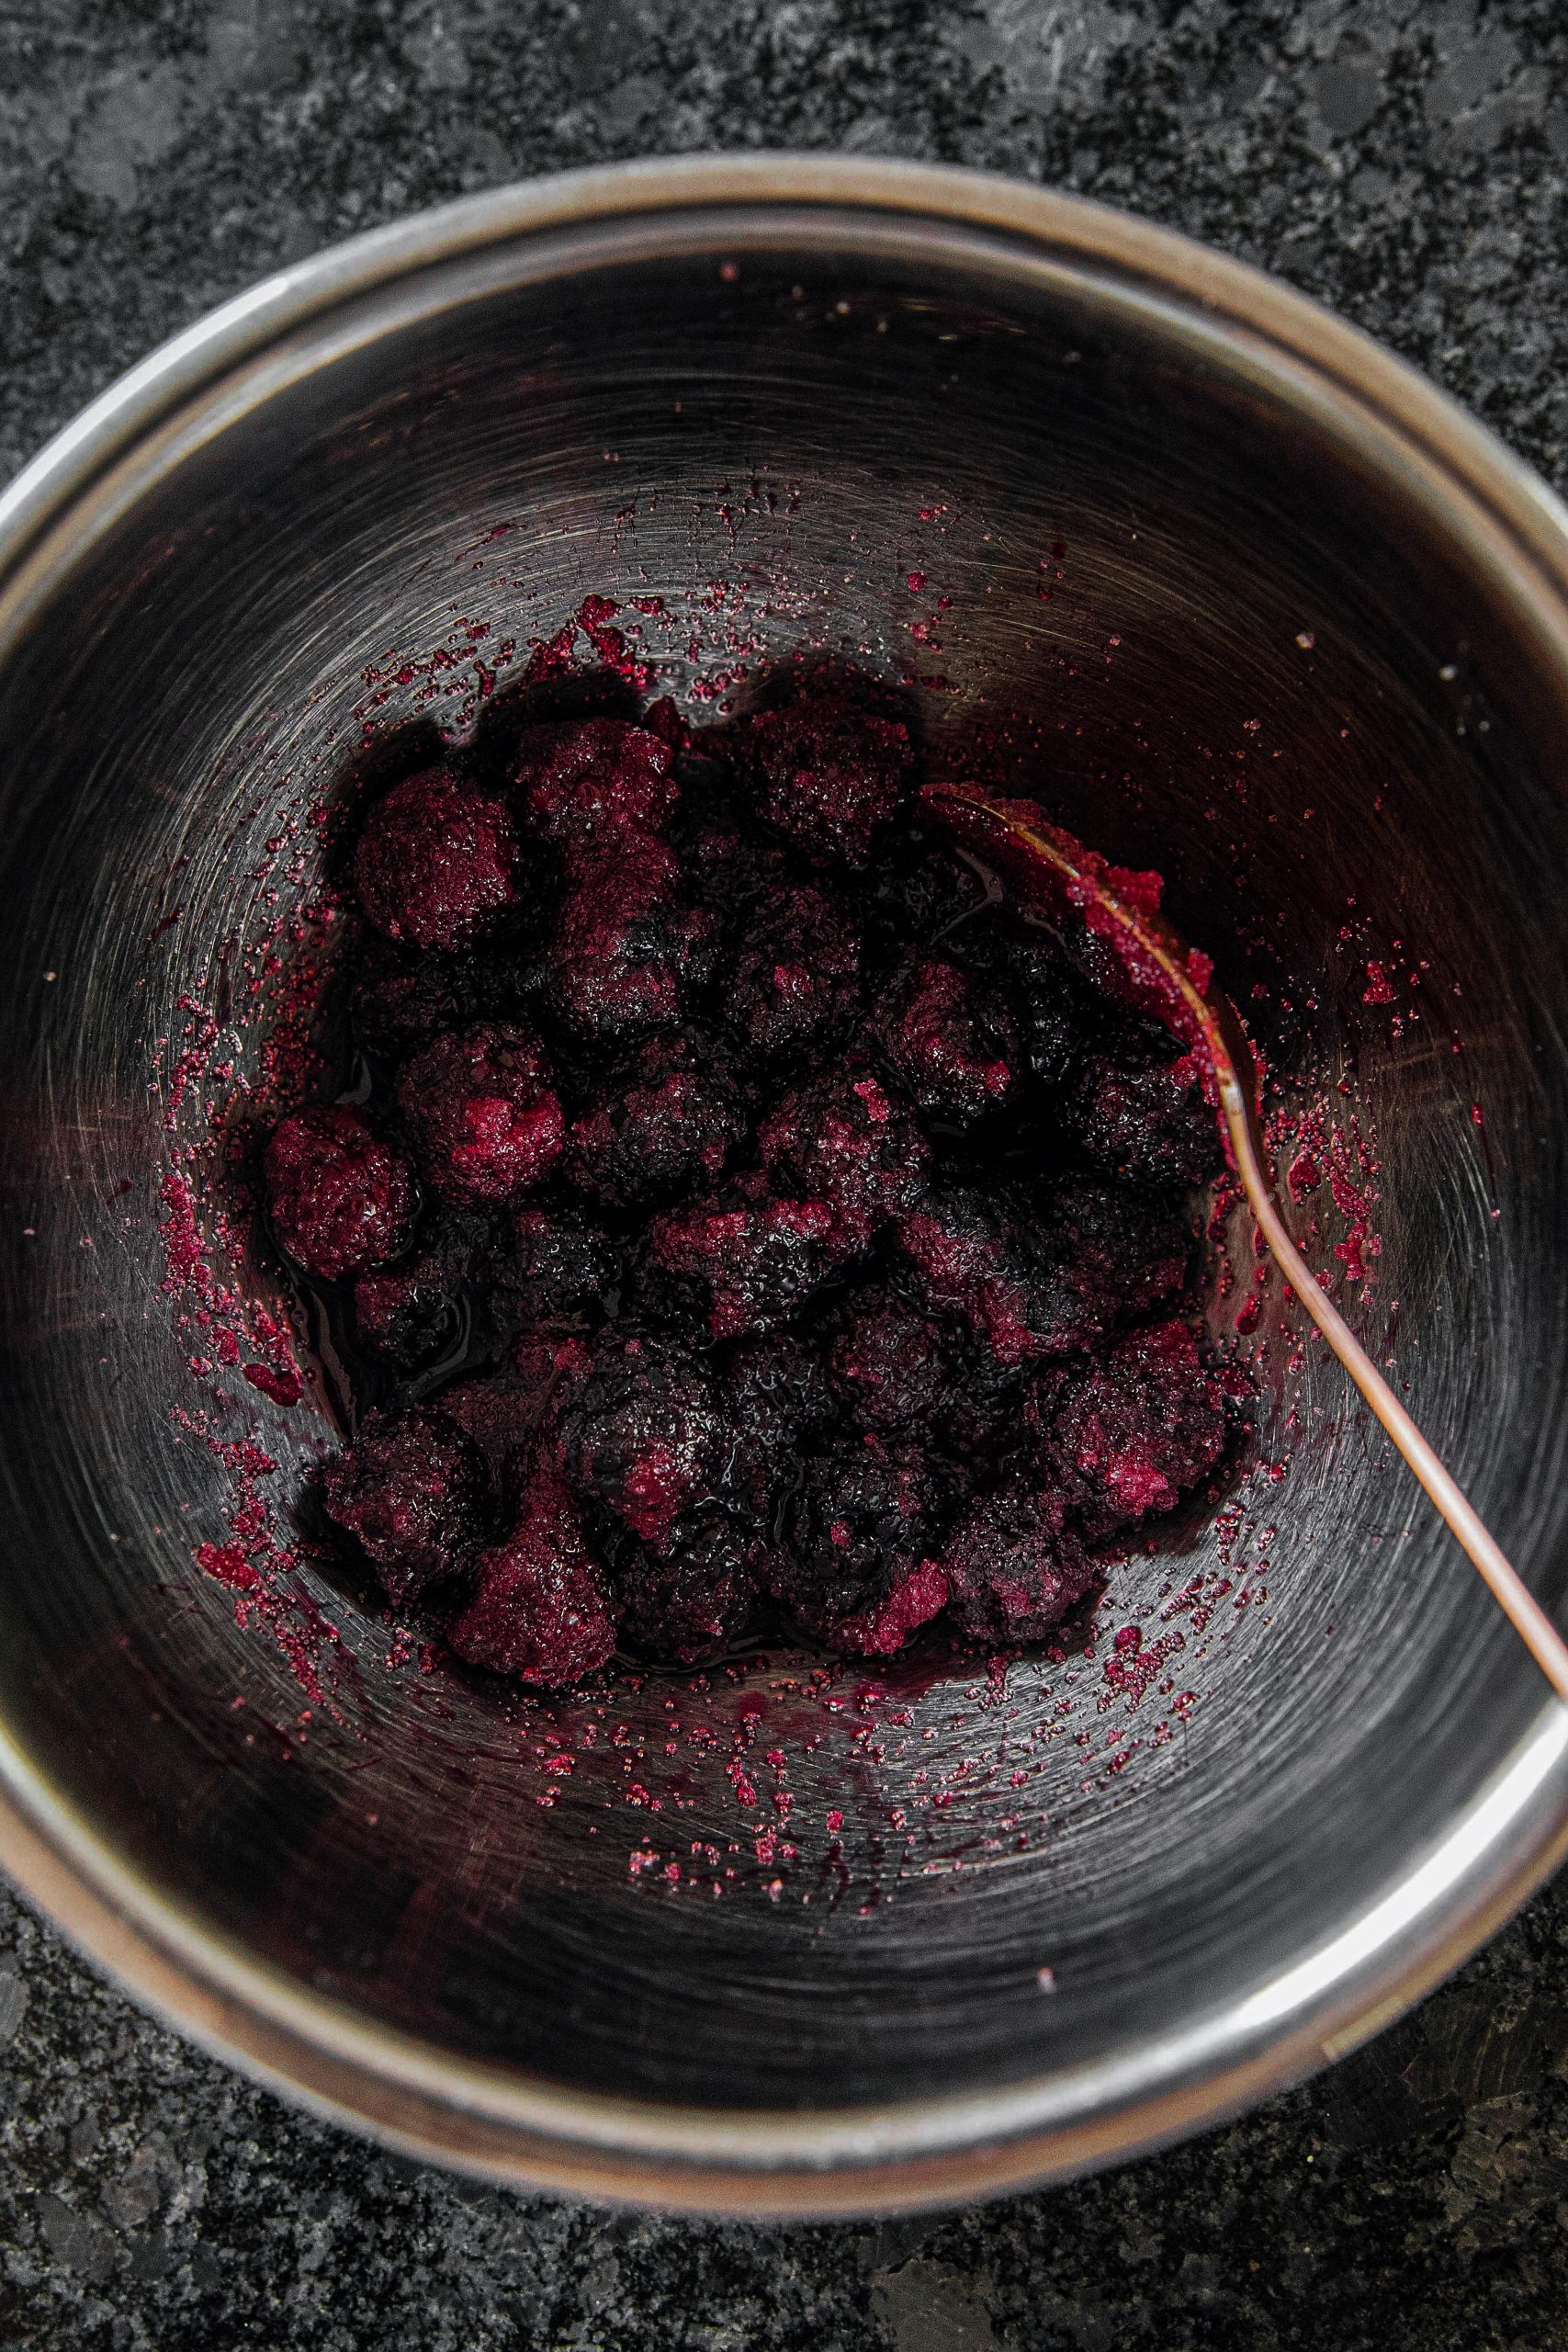 Stir the berries along with the sugar. Make sure everything is mixed very well. Let it sit for about 30 minutes.